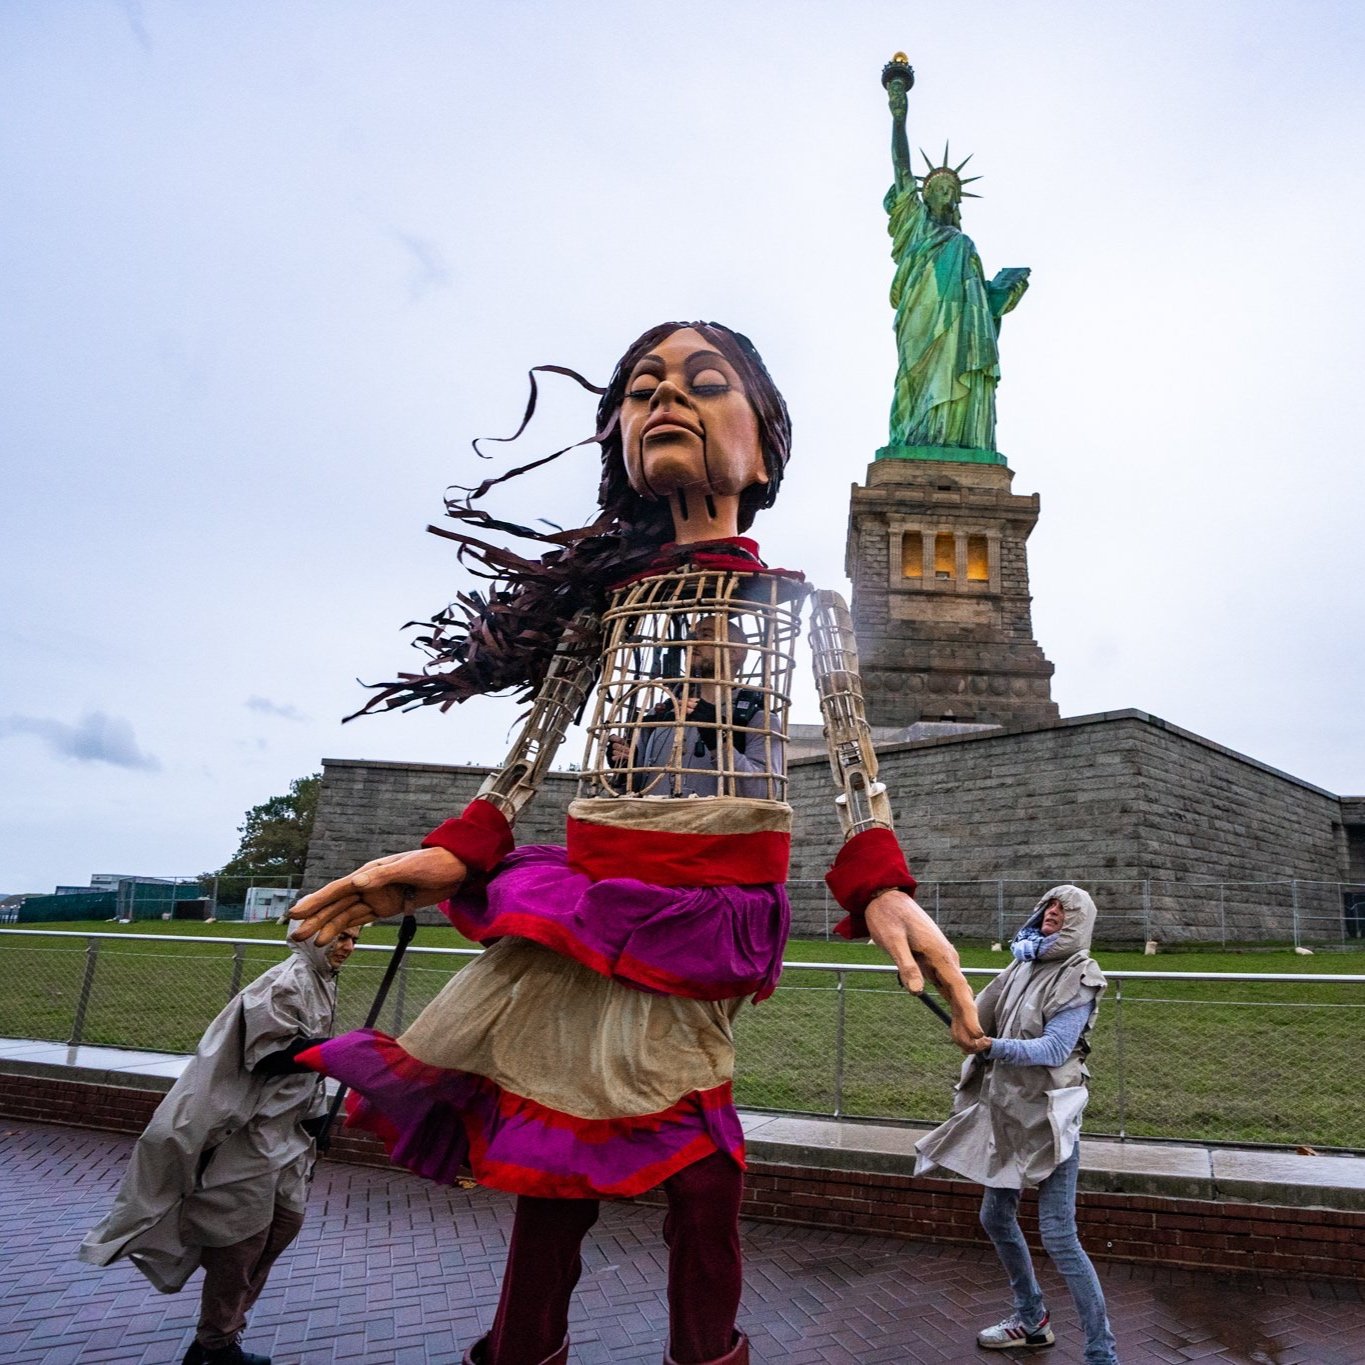 Amal+-+Statue+of+Liberty+NYC+1+%28c%29+The+Walk+Productions+%28c%29+Respective+Collective.jpg